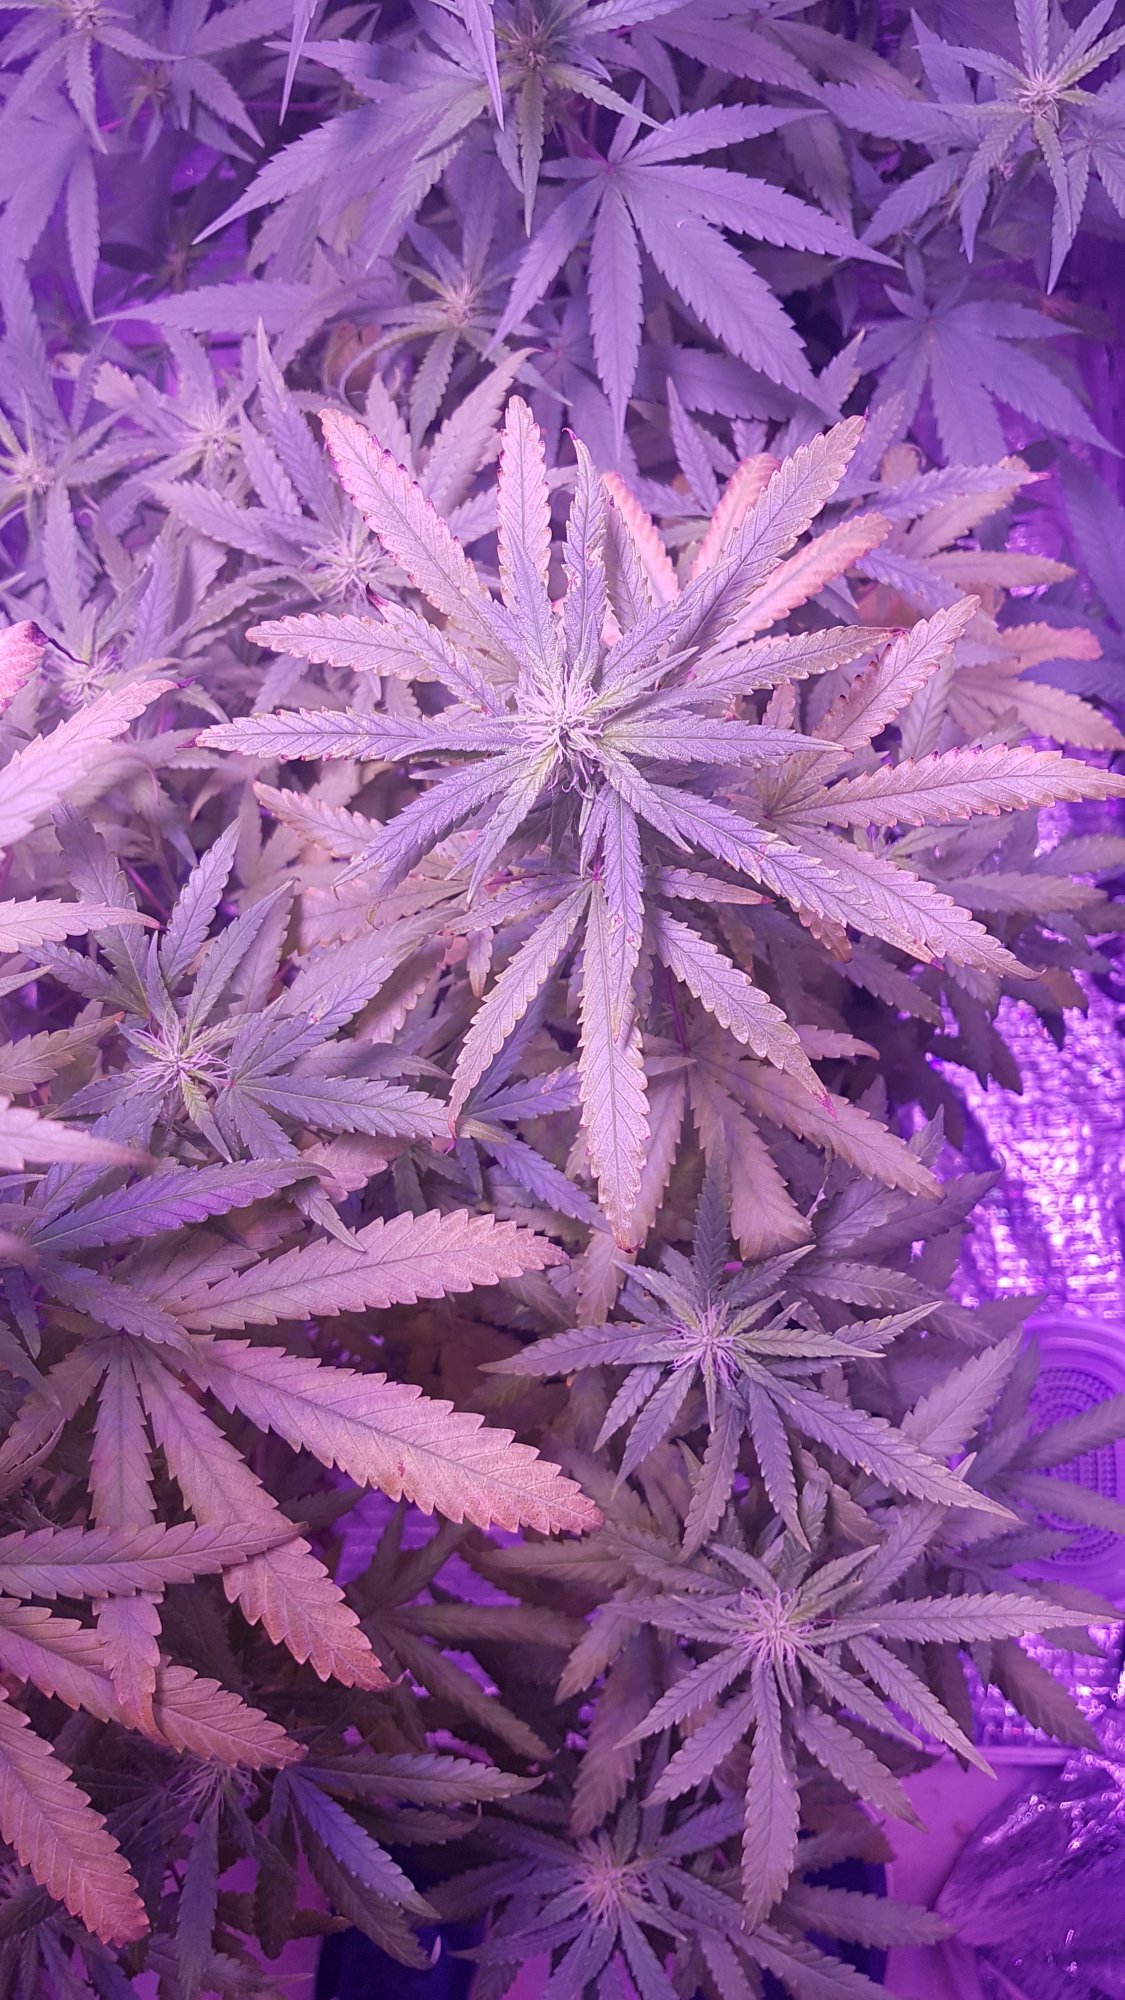 Any help would be great  5 week of flowering 2